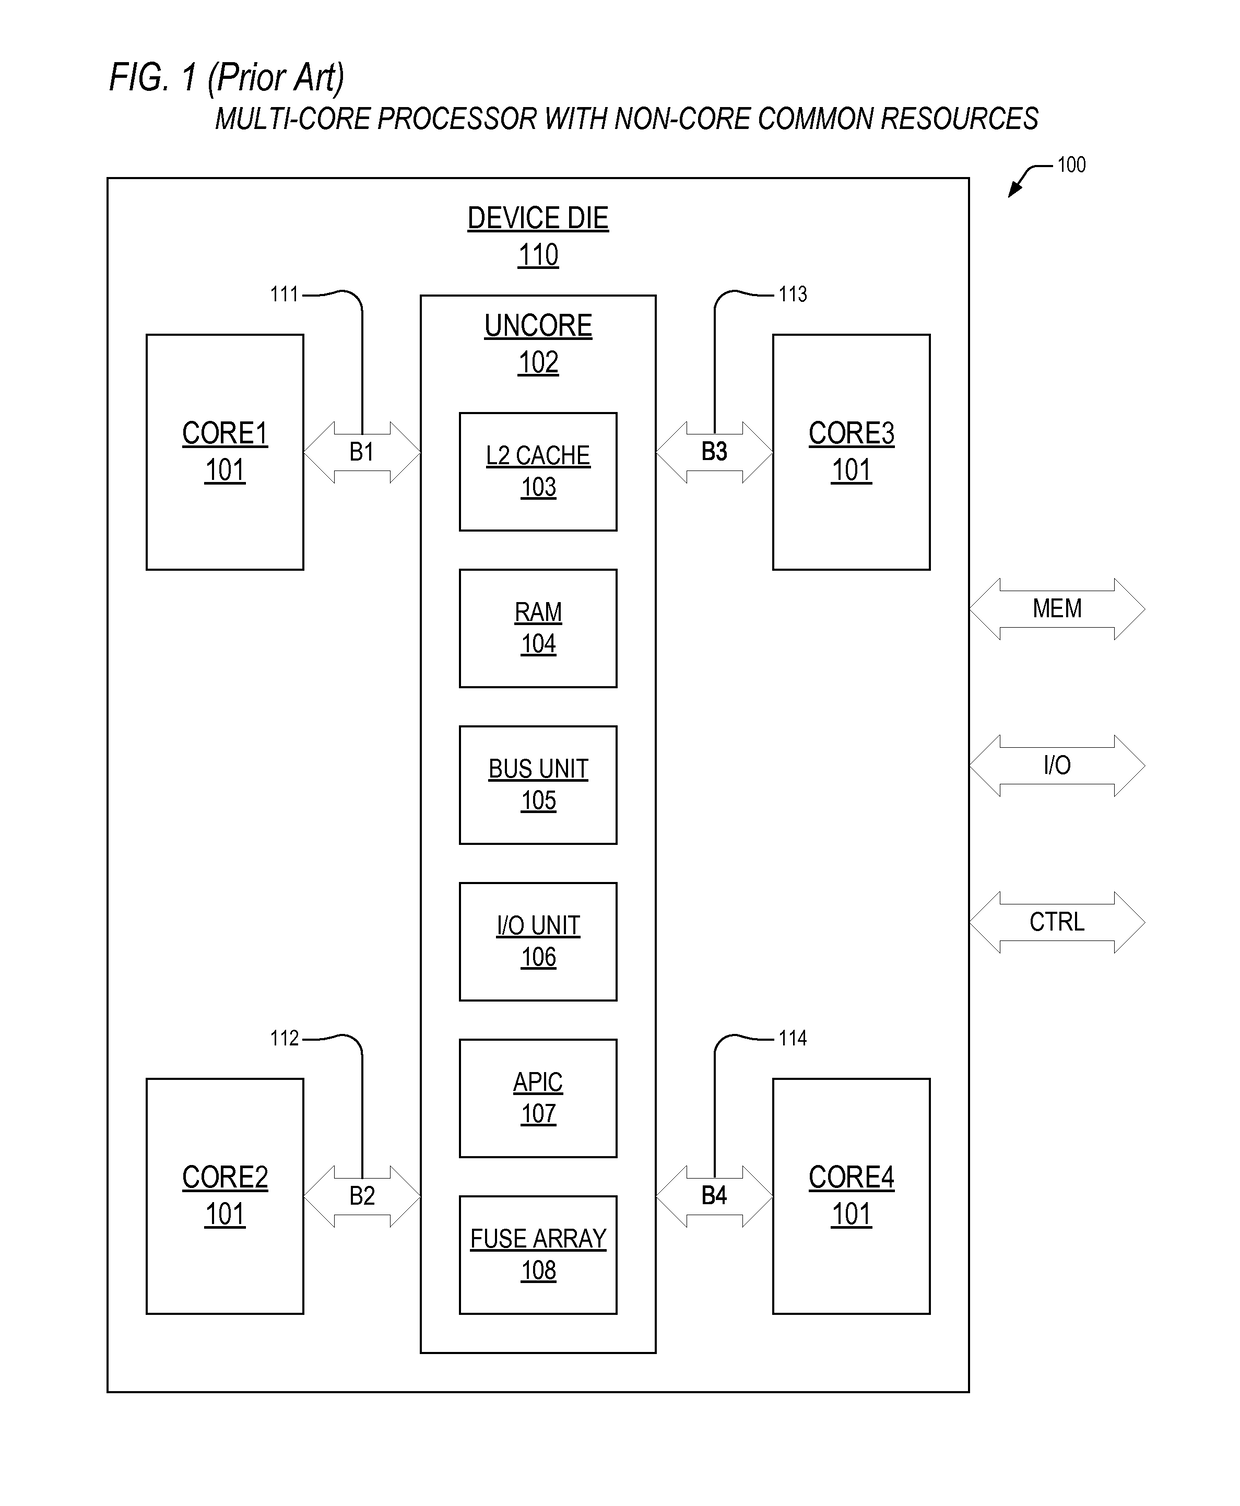 Mechanism to preclude shared ram-dependent load replays in an out-of-order processor